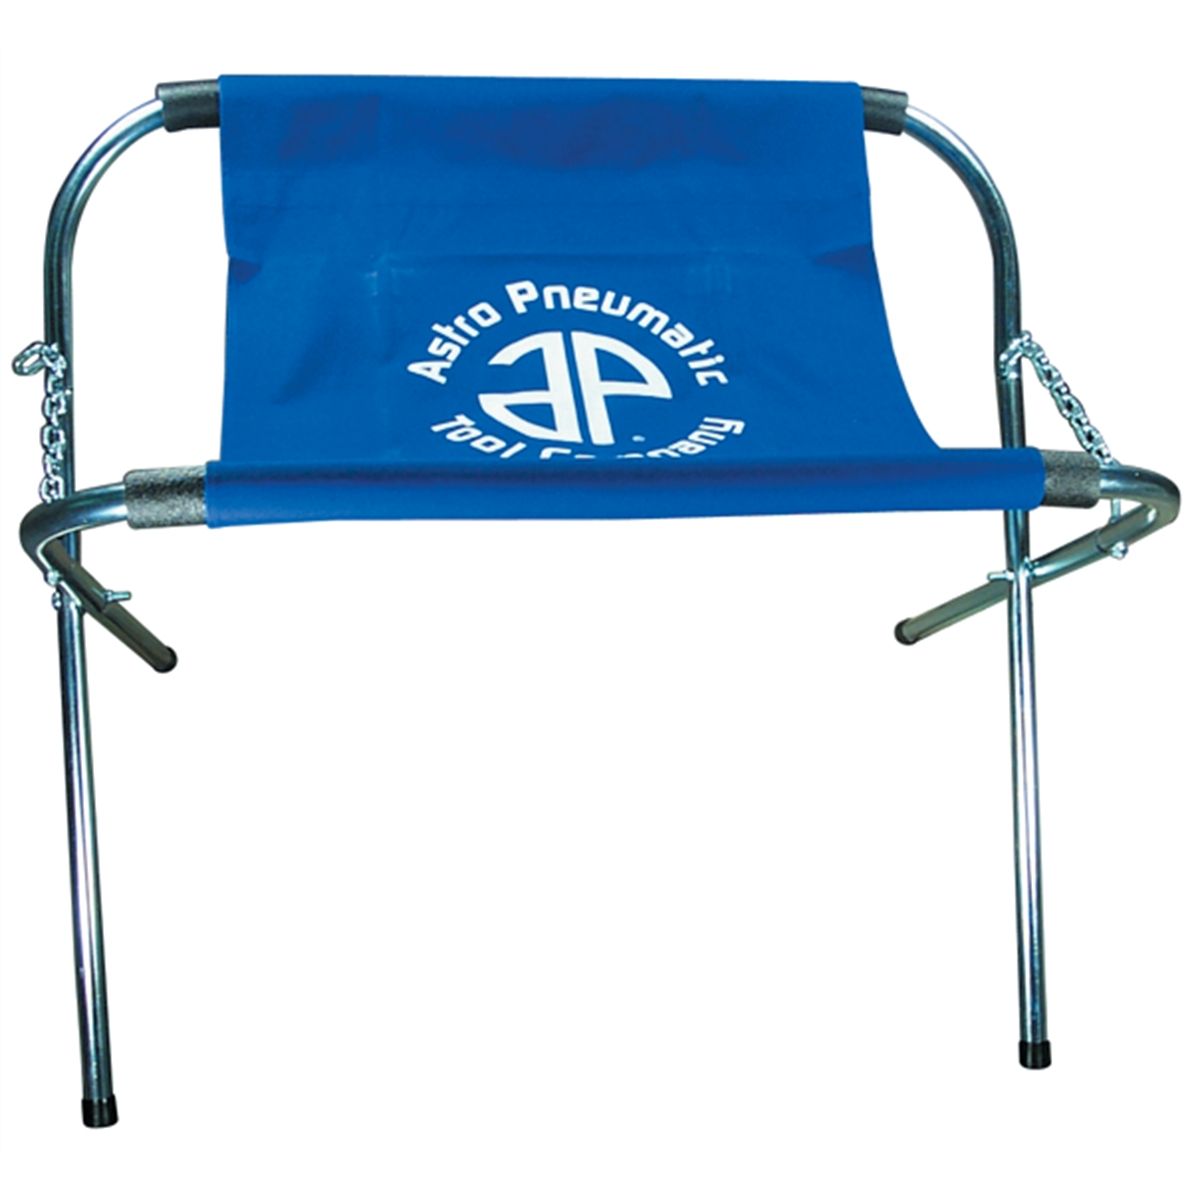 Portable Work Stand w/ Sling - 500 Lb Capacity